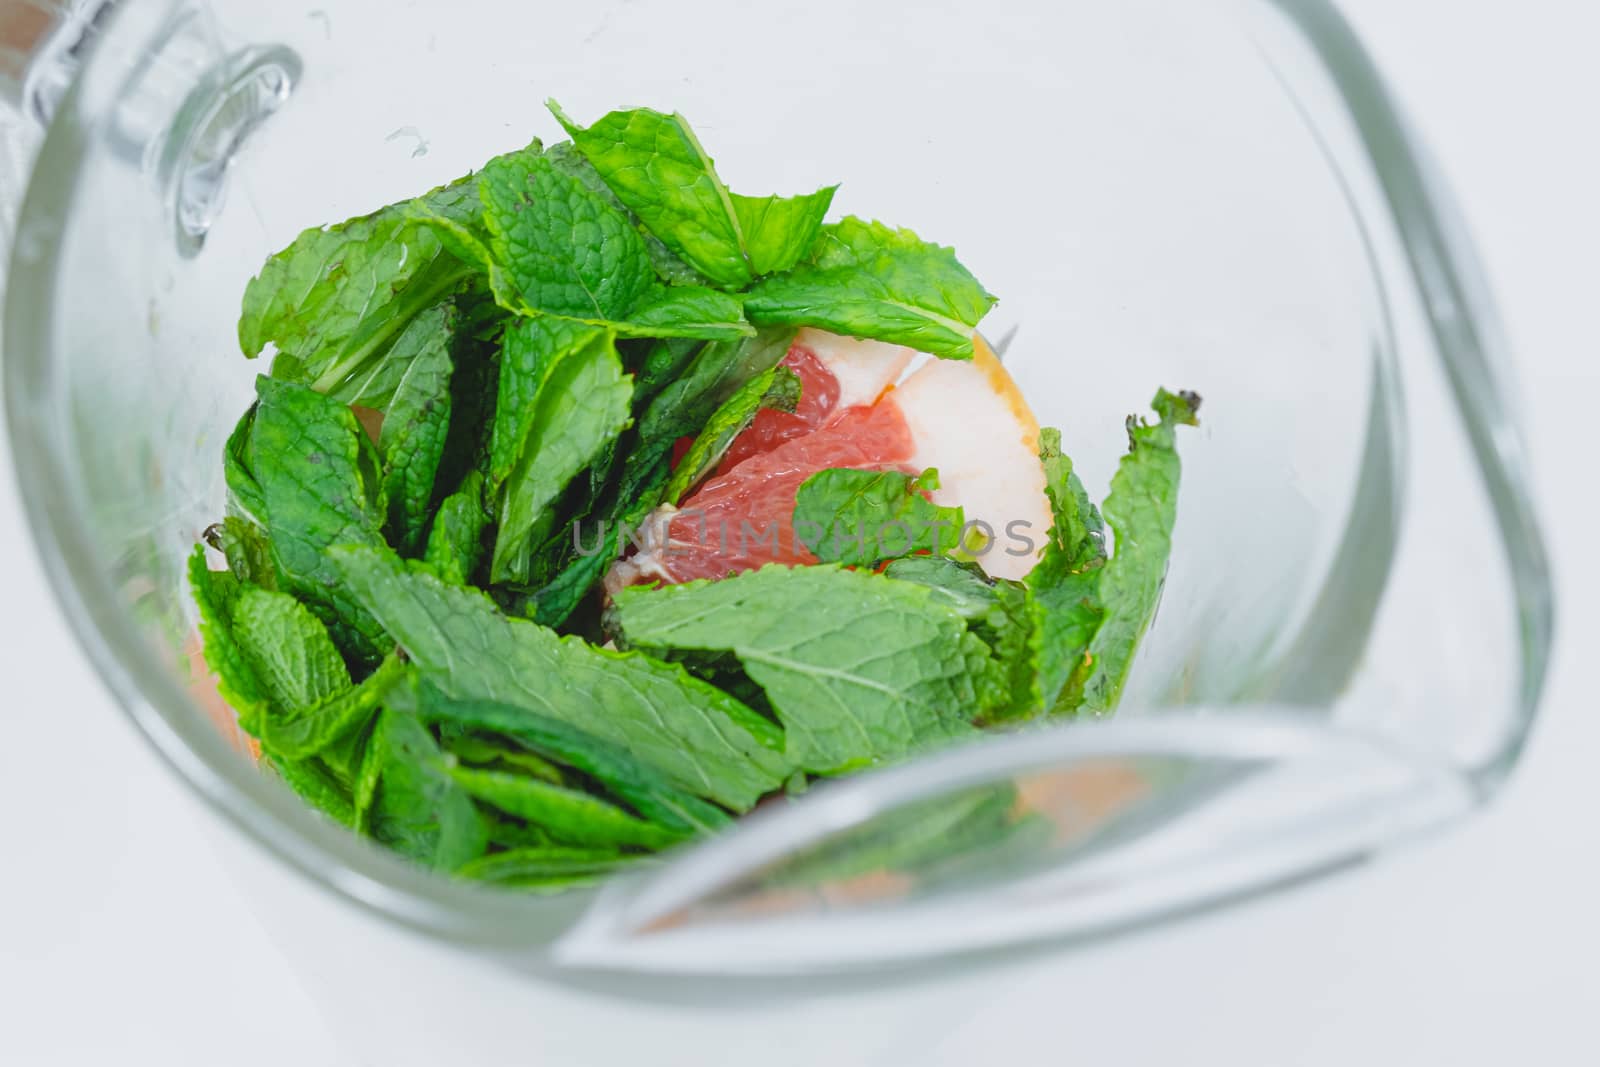 Fresh peppermint leaves and grapefruit slices in a glass, close-up view. Preparing tonic water or lemonade, healthy fresh drink concept